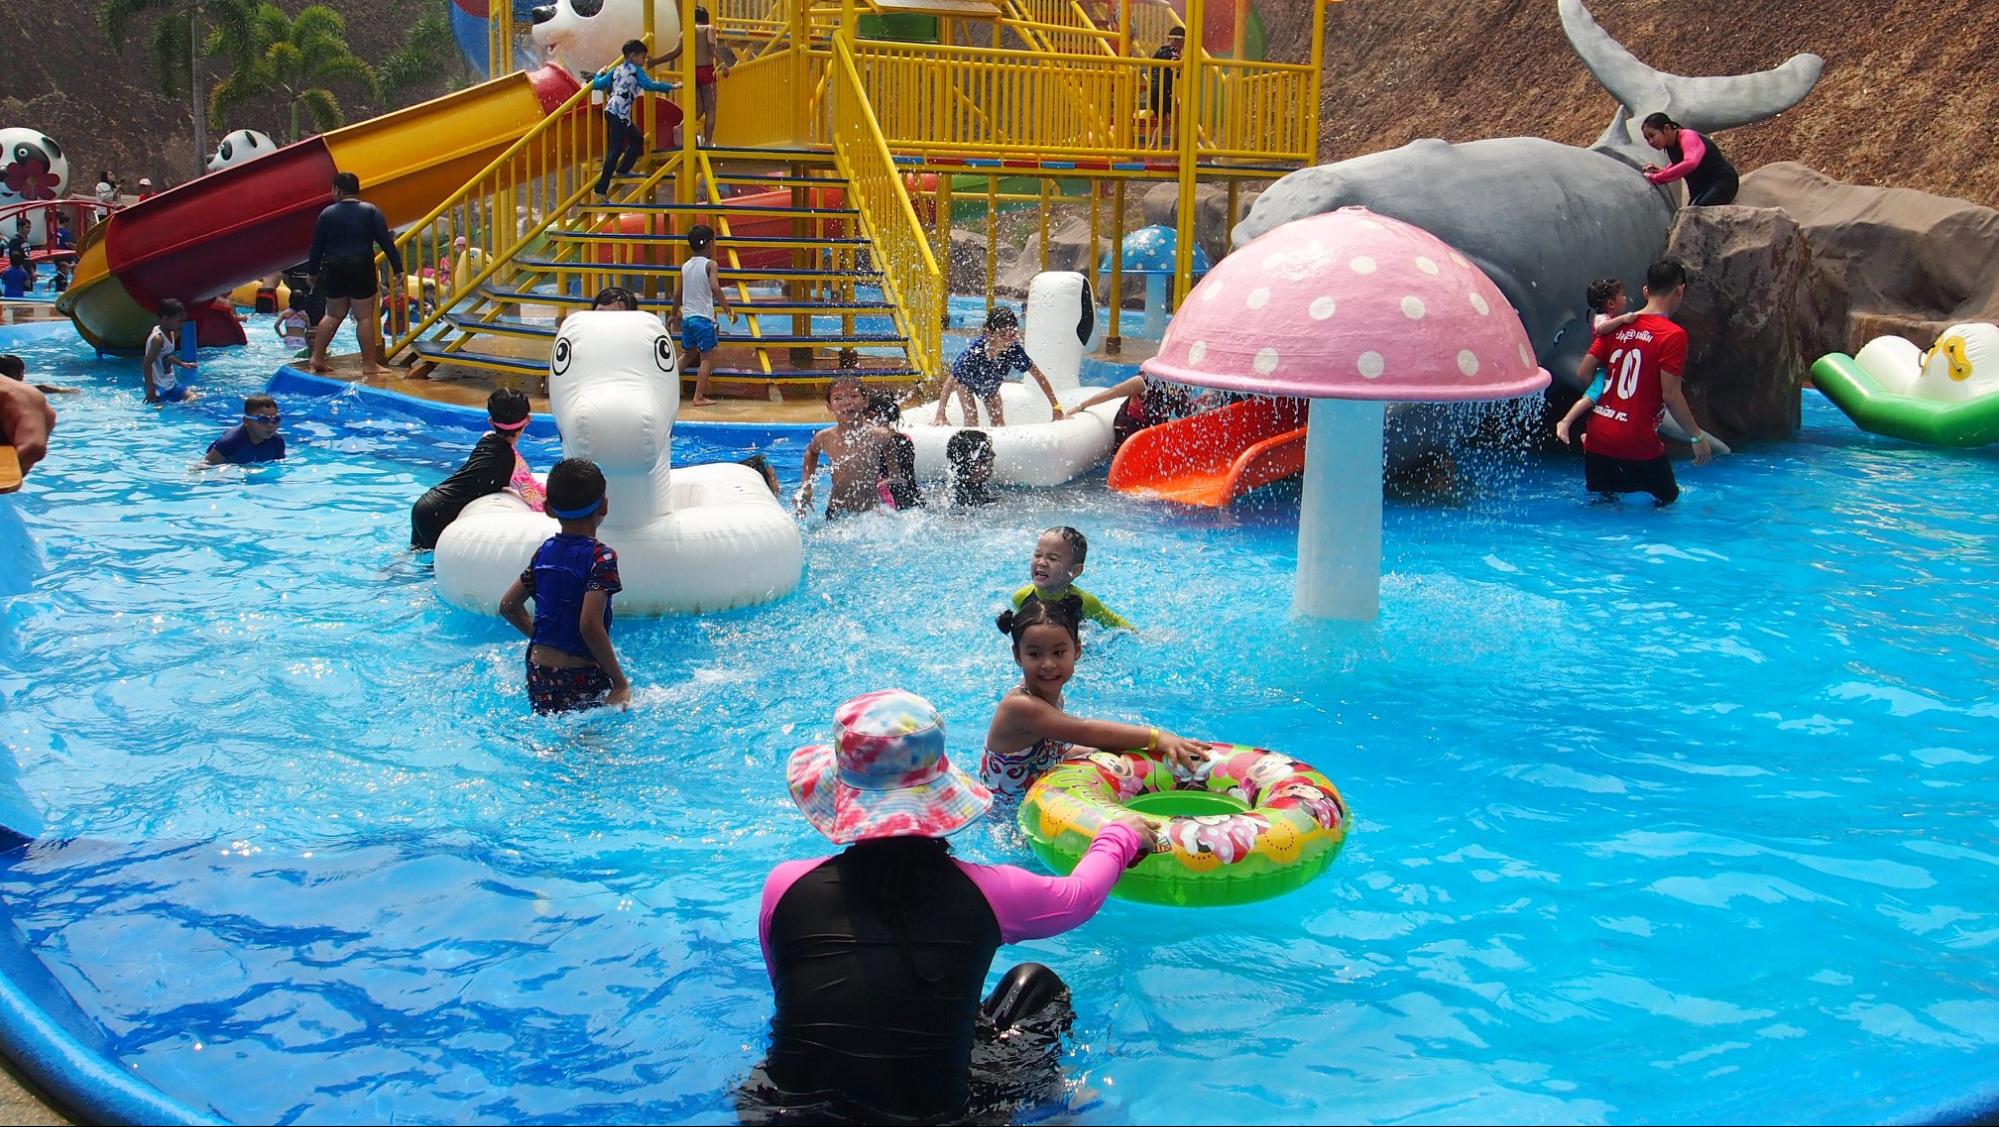 The Kiddy Water park Session